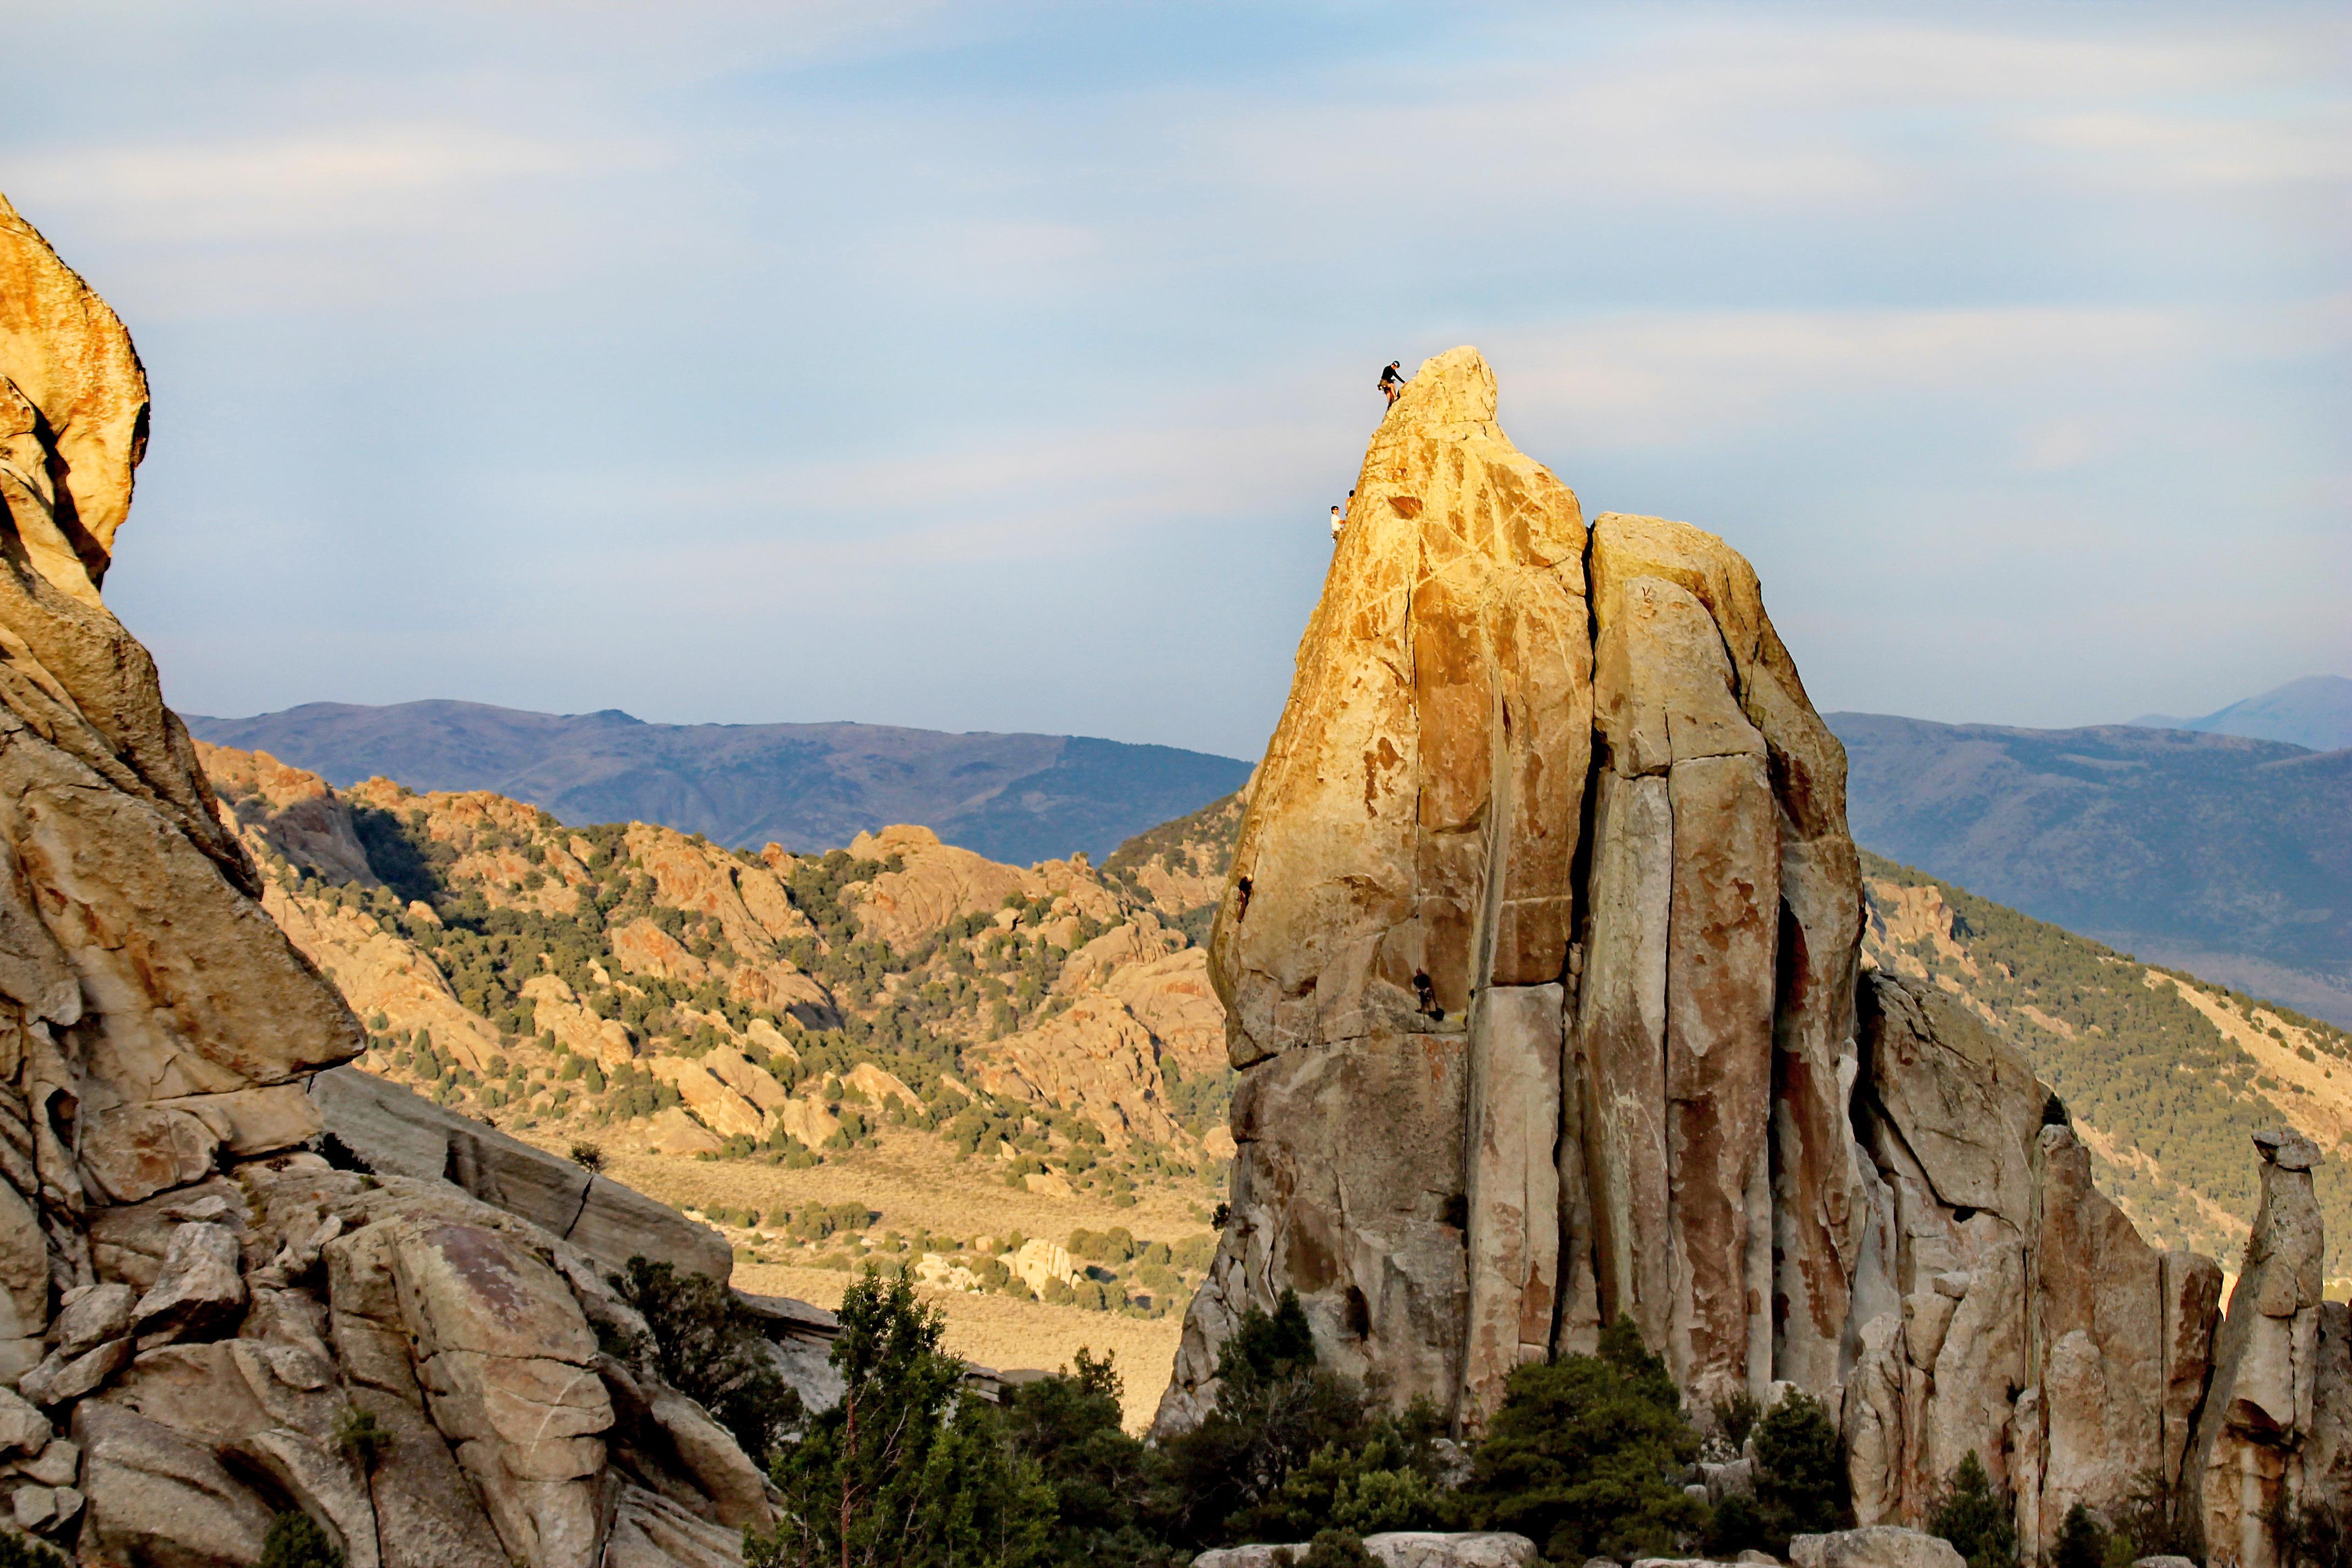 A climber ascends a granite spire with mountains in the distance.